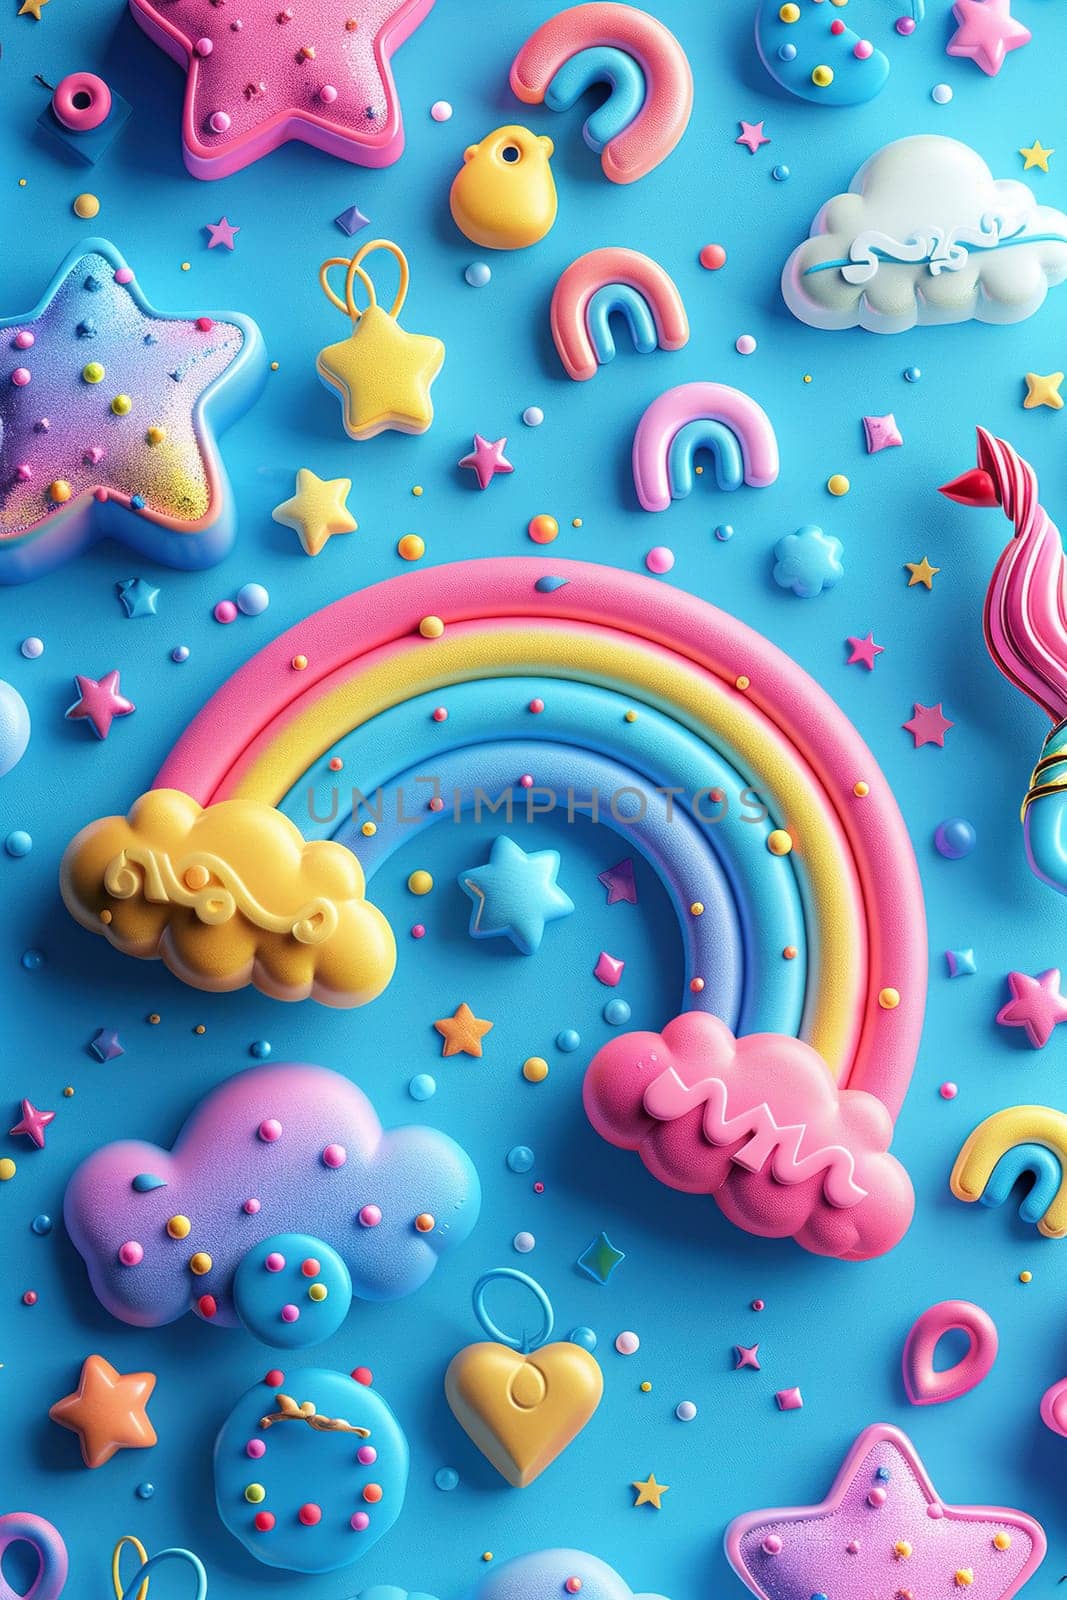 Illustration in 3D style with rainbow, stars and clouds. Vertical cartoon background for tik tok, instagram, stories. Generated by artificial intelligence by Vovmar